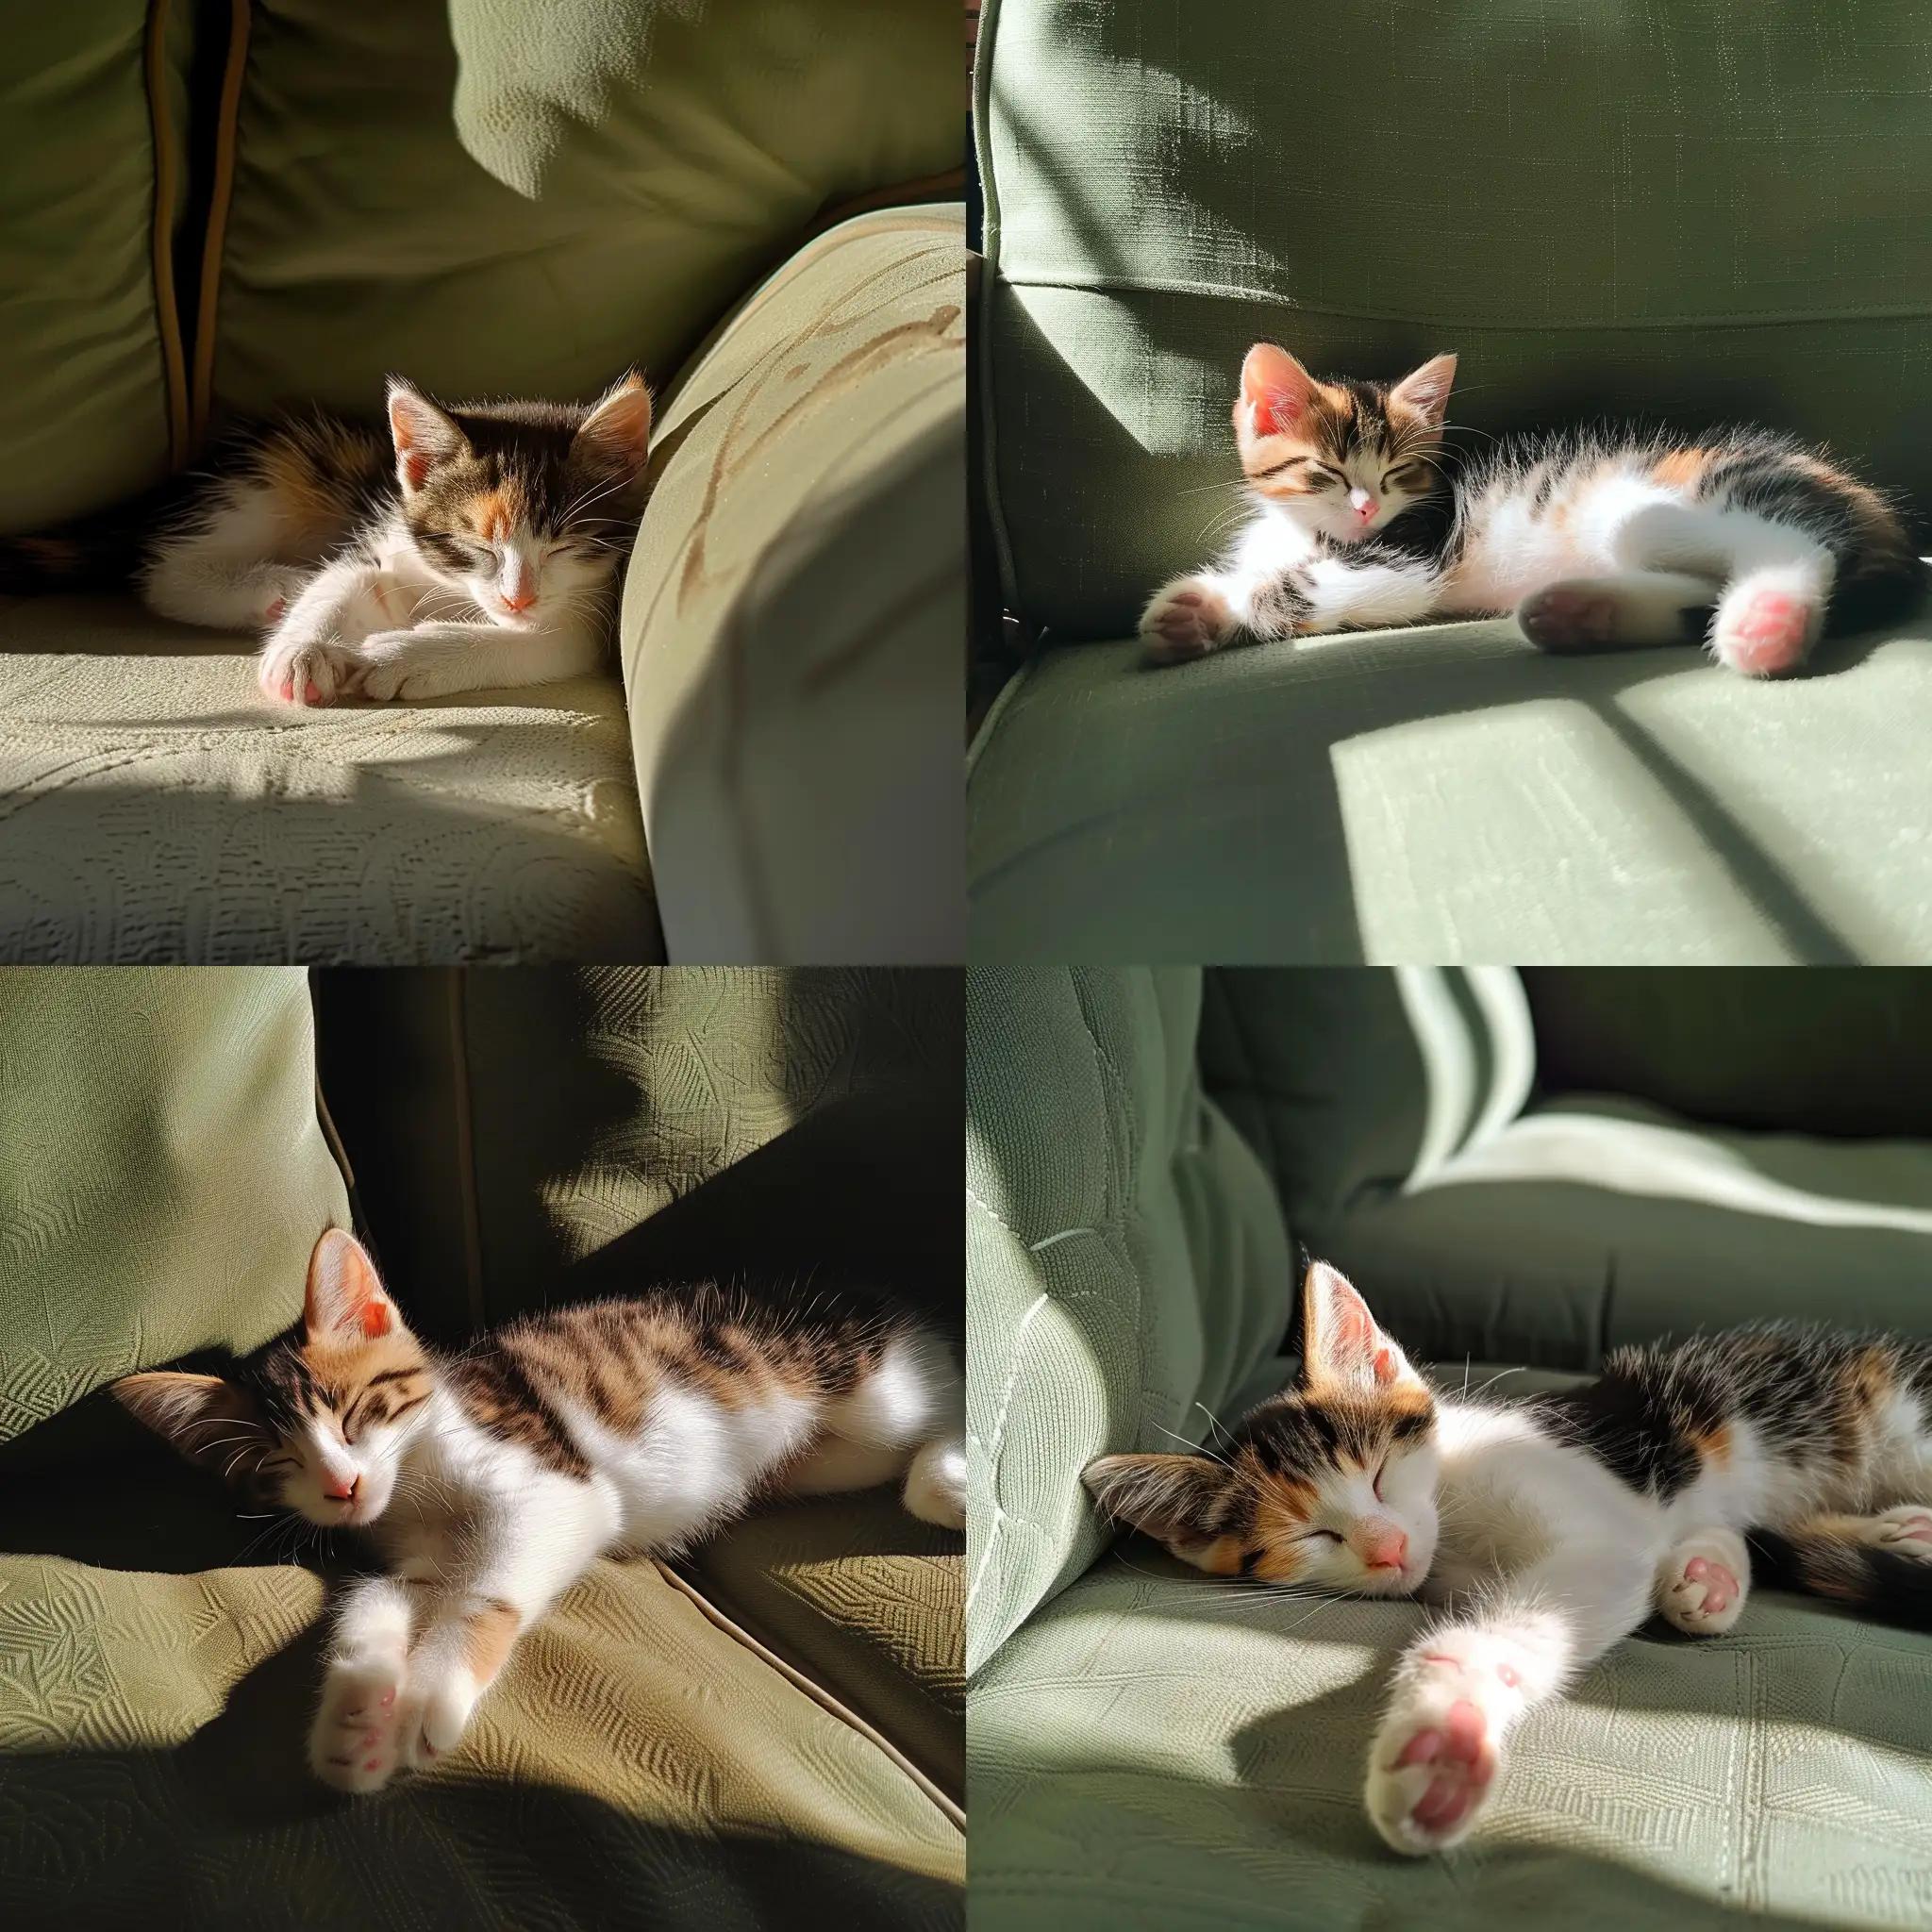 Sleepy-Calico-Kitten-Napping-in-Sunlight-on-Sage-Green-Couch